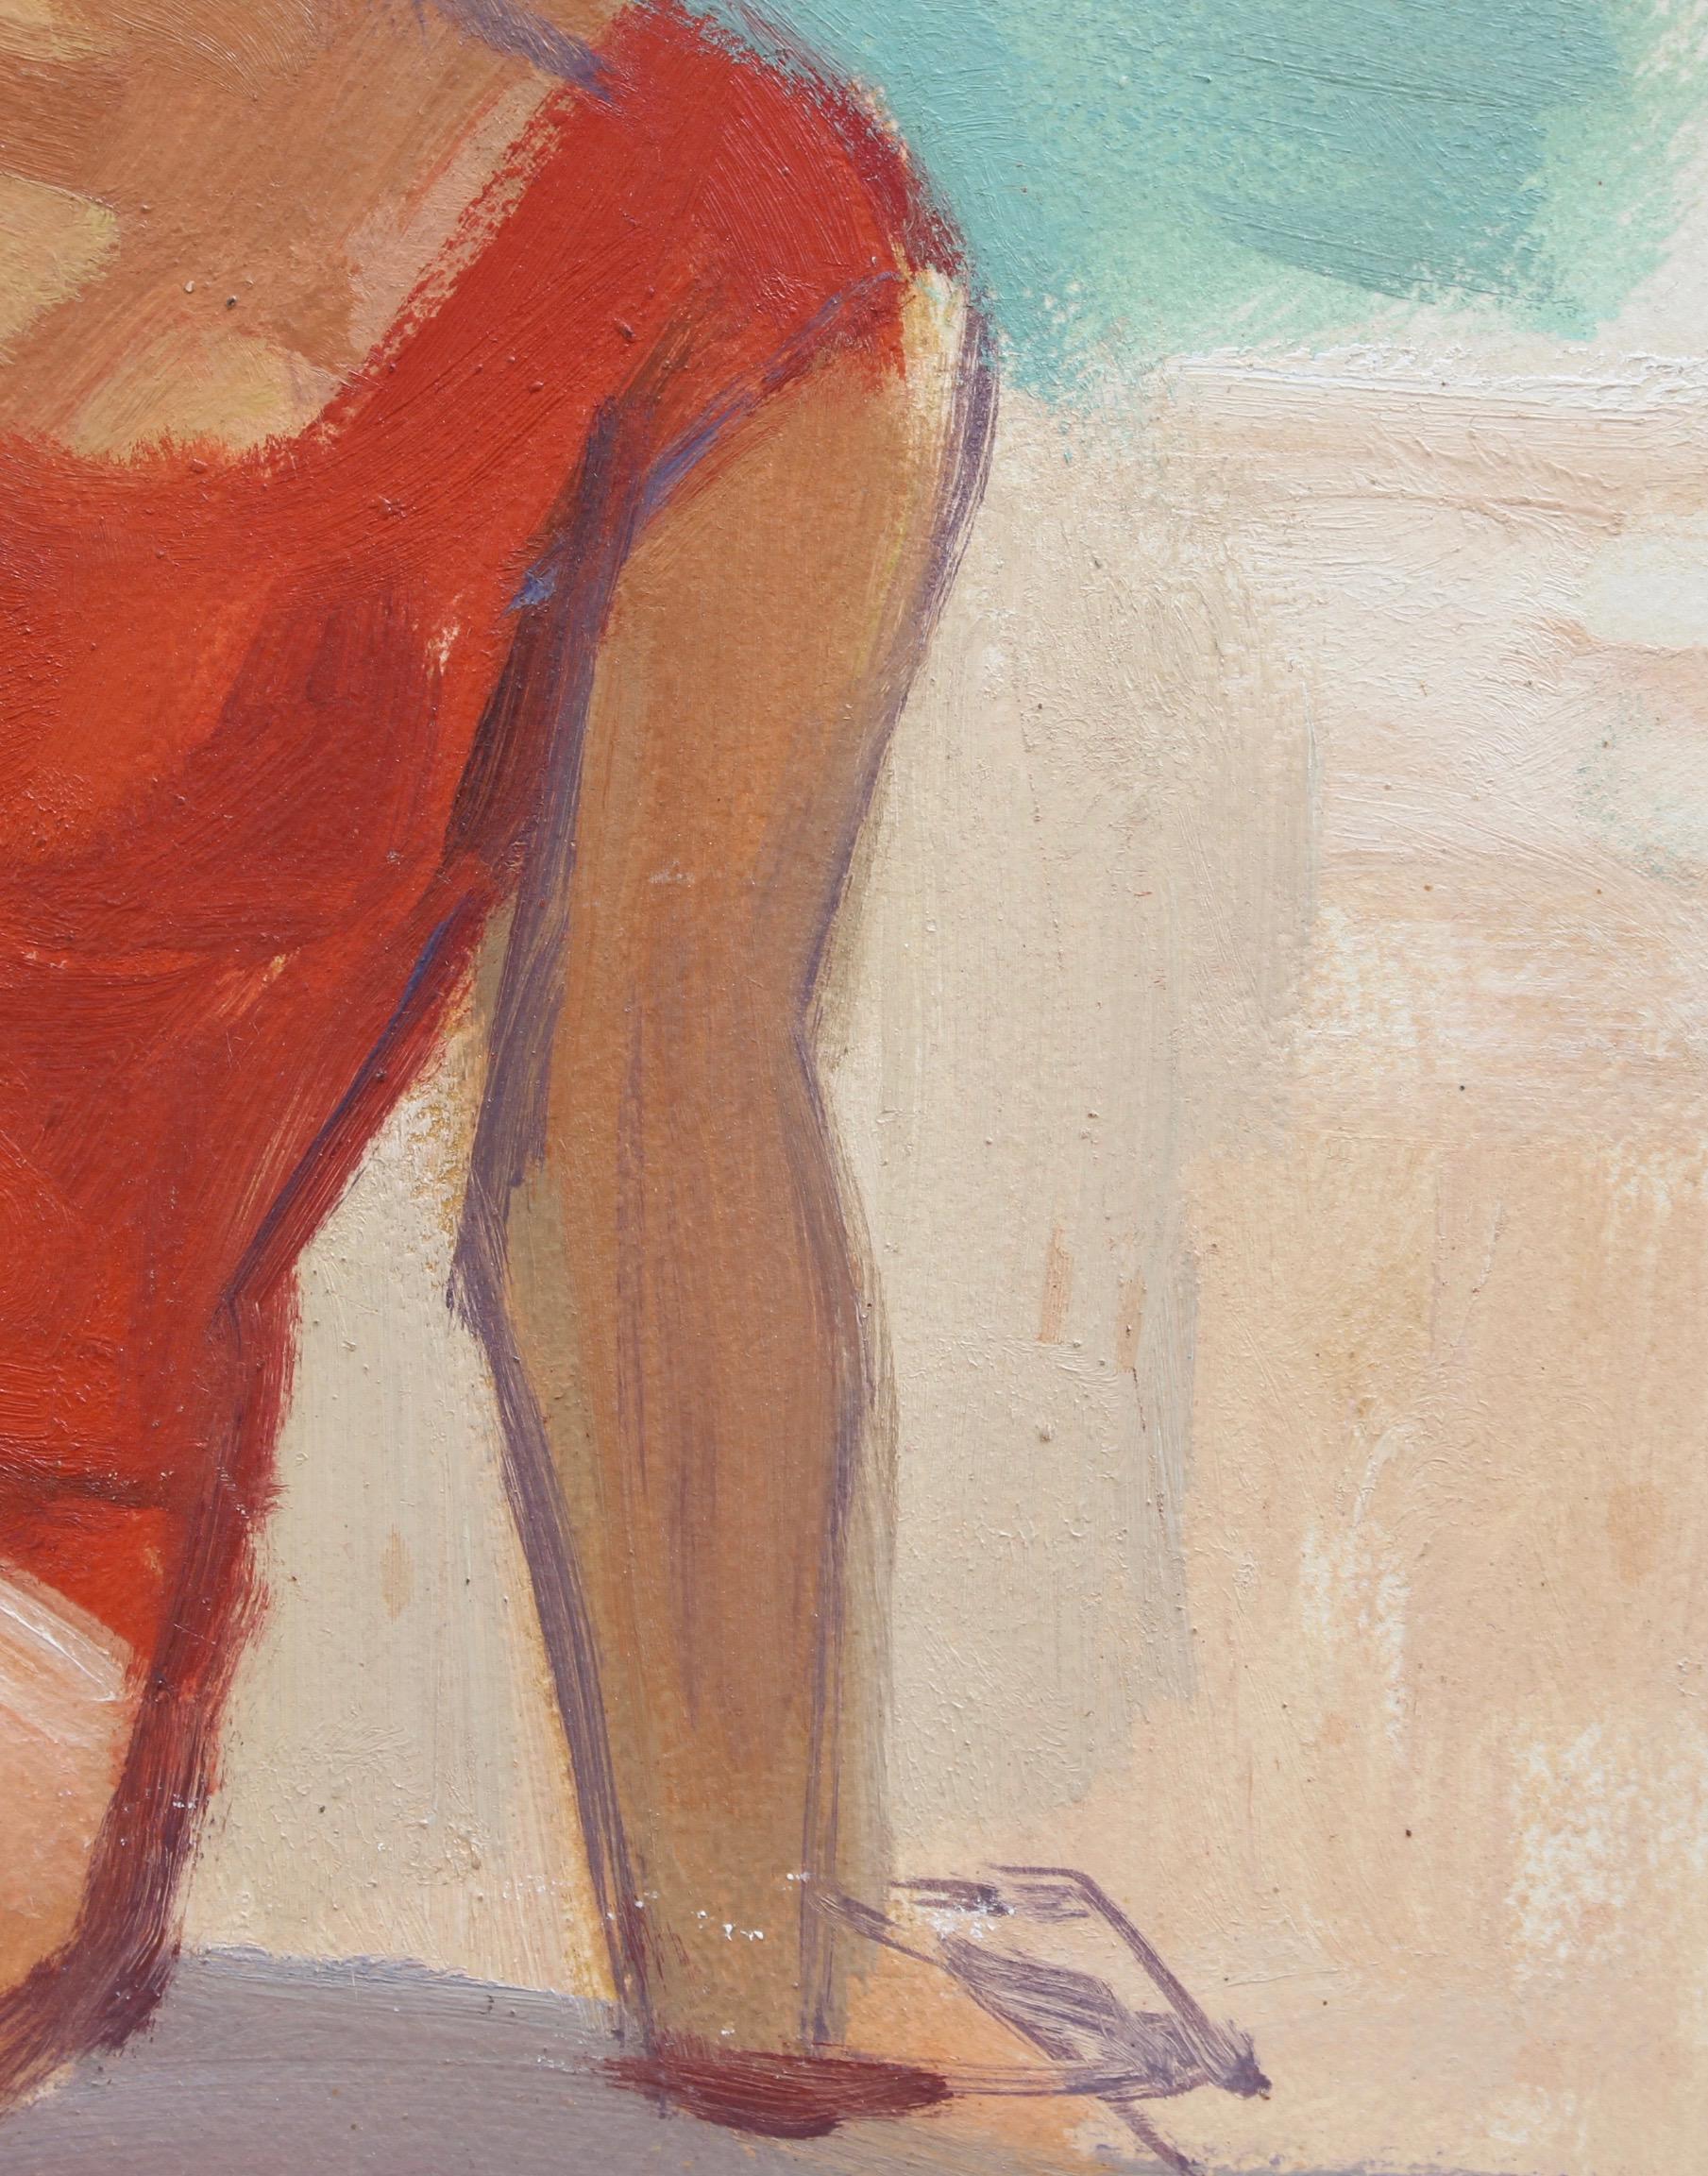 'The Bather', oil on board, by Jean Rudel (circa 1950s). A young woman sits on the sandy Mediterranean beach in the South of France in her vivid red bathing costume. WIth her, are the blue sky, the sea and the pure bliss of contact with the fine